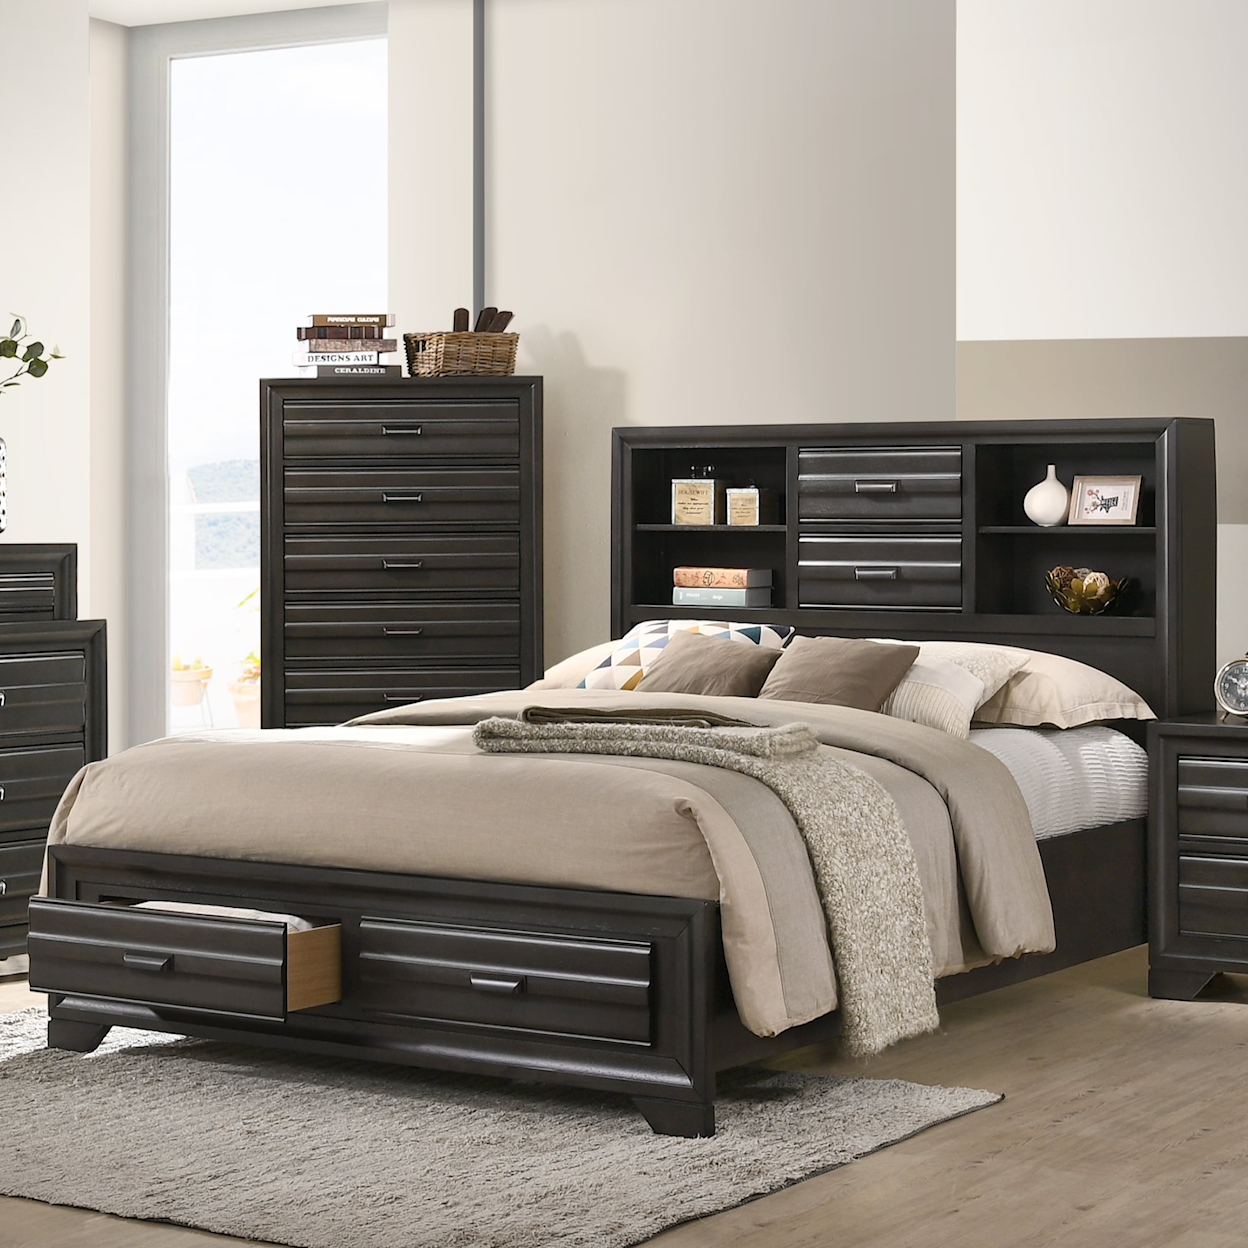 Lifestyle Timmy TIMMY GREY KING BED |